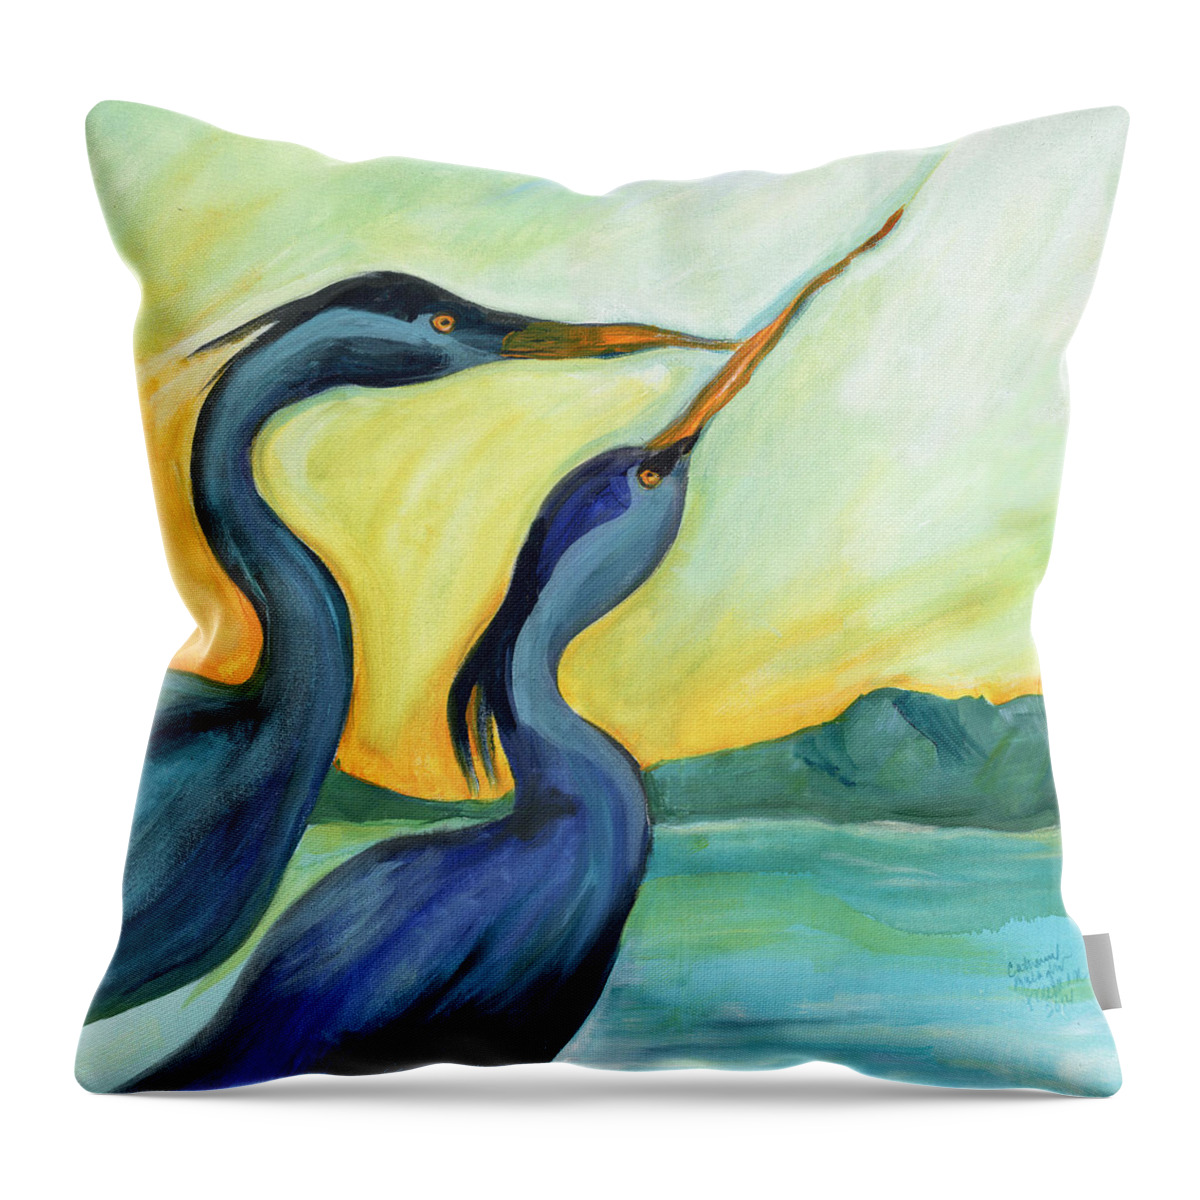 Landscape Throw Pillow featuring the painting Two Herons by Catharine Gallagher